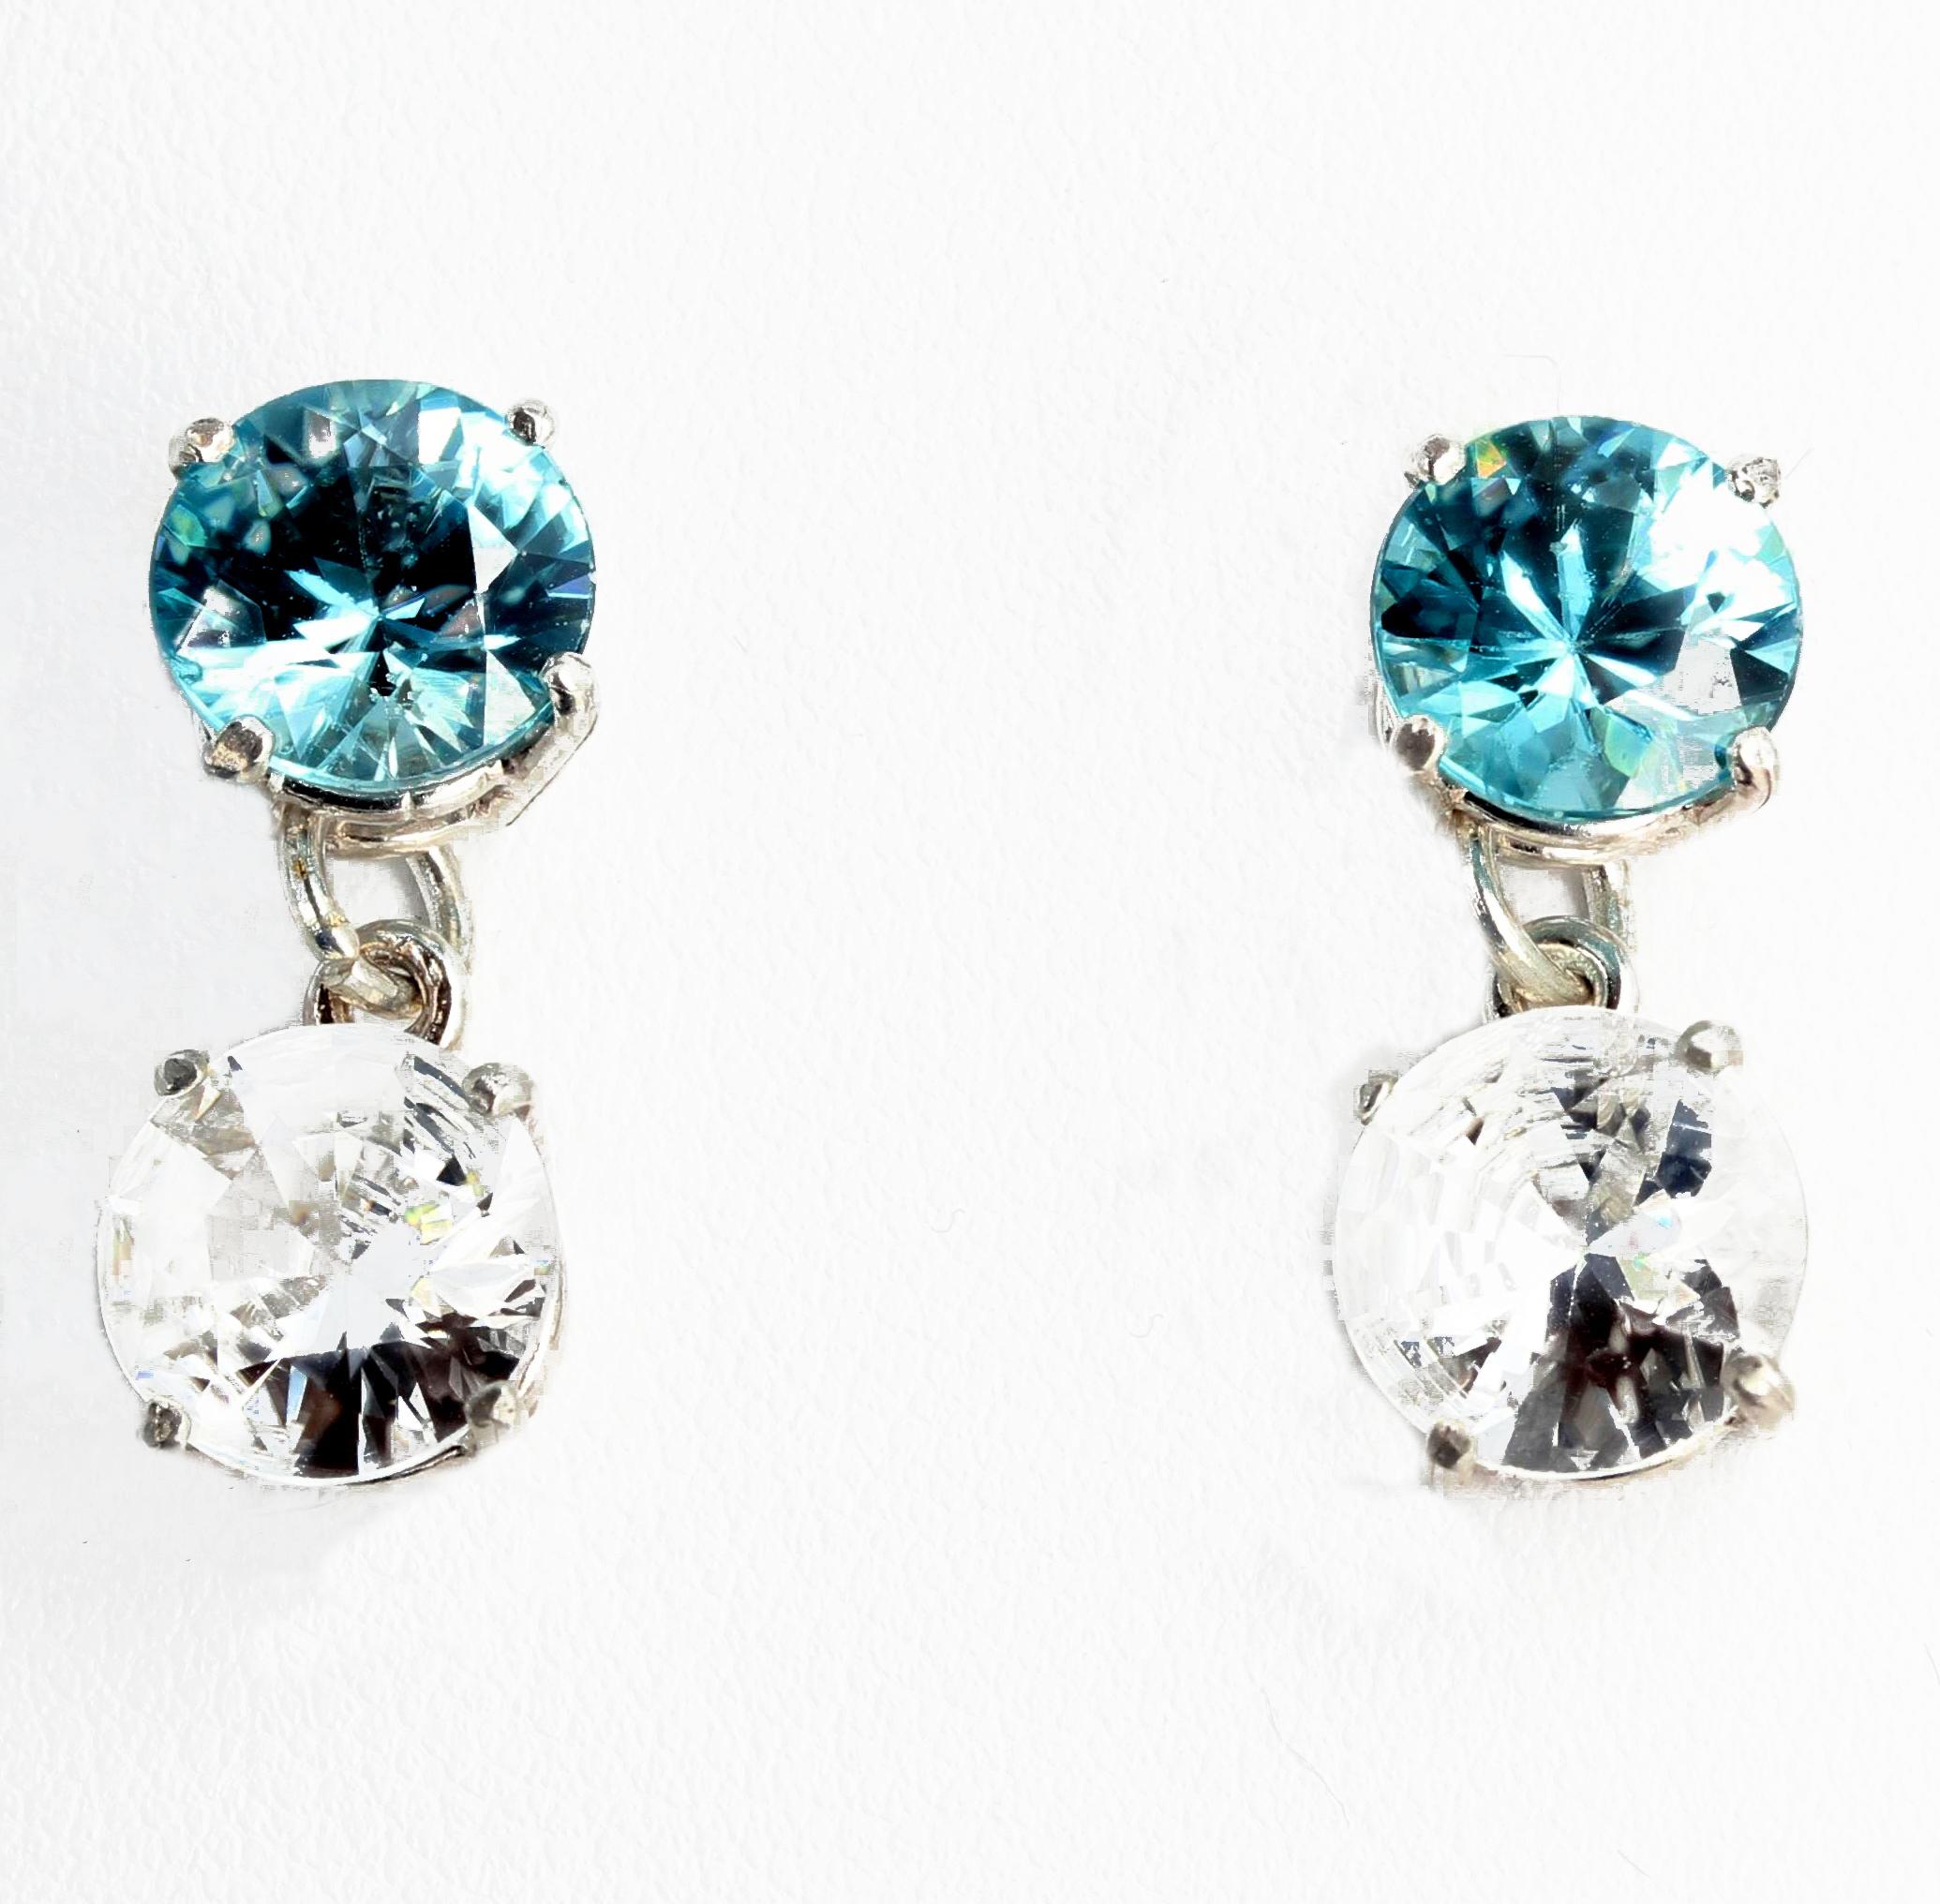 AJD Stunning 11.69Cts of Blue & White Zircons Sterling Silver Stud Earrings 3